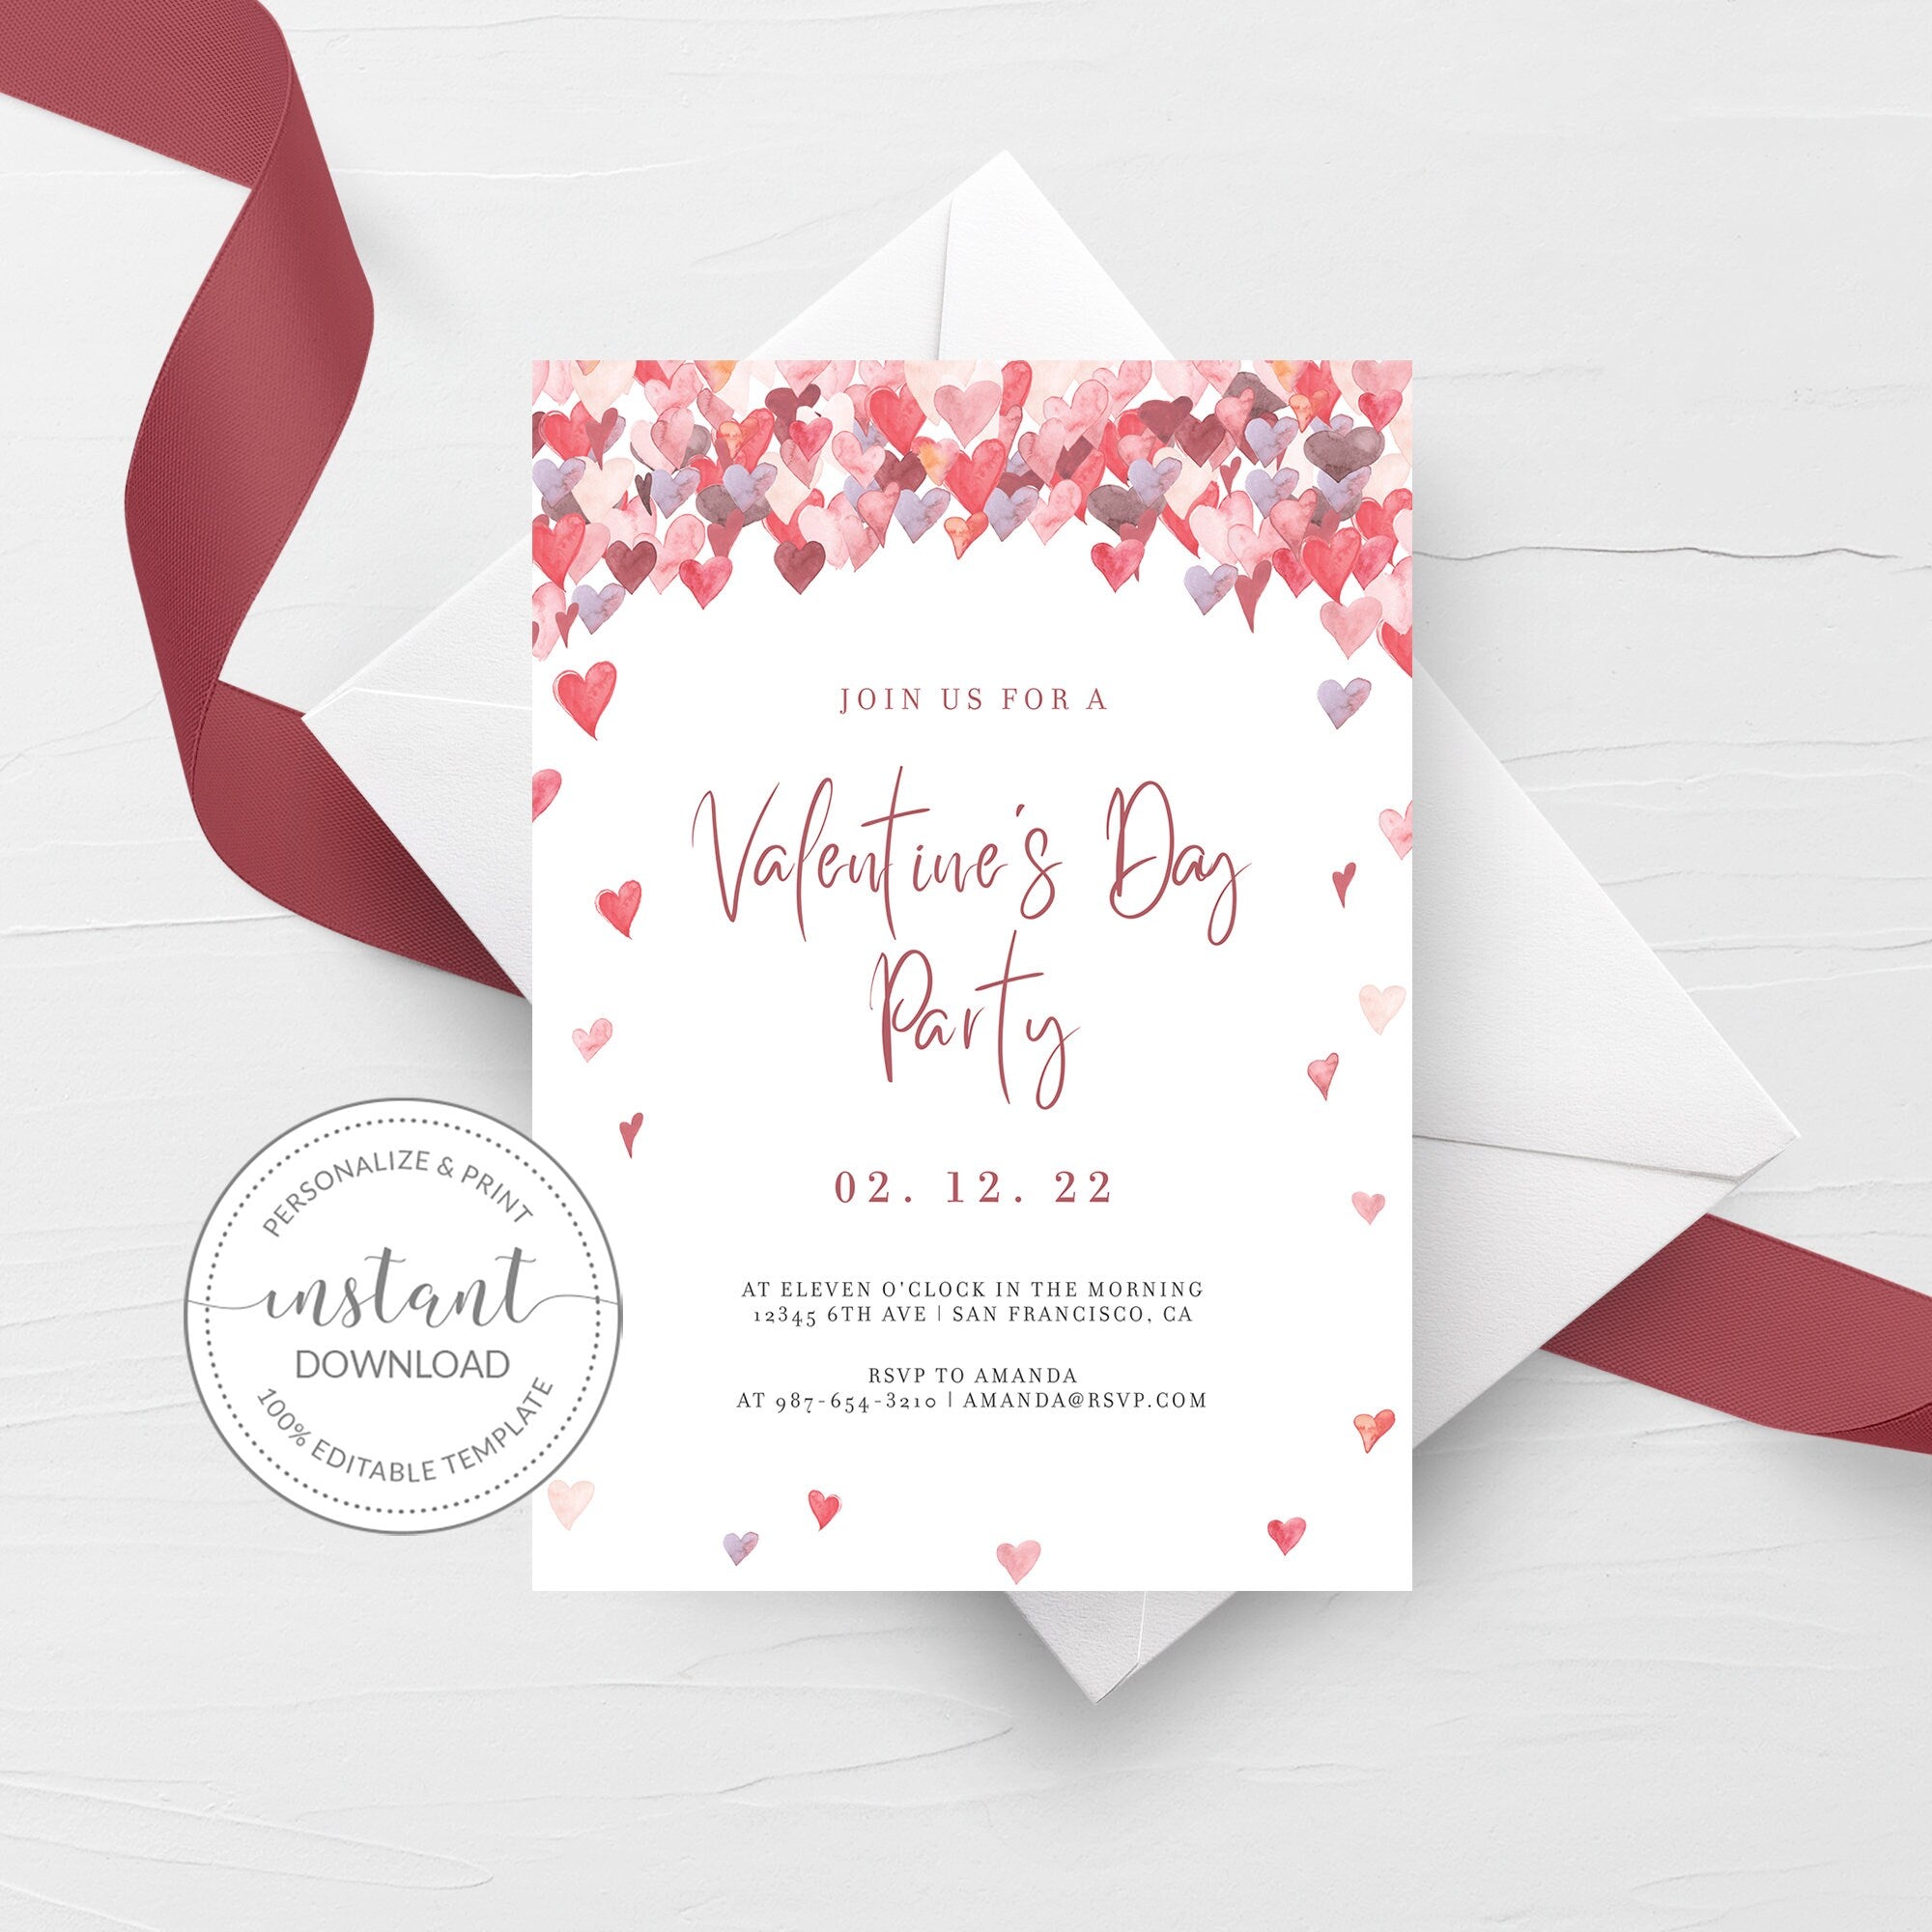 Valentines Day Party Invite Template, Valentines Brunch Invitation, Printable Valentine Party Invitation, INSTANT DOWNLOAD VH100